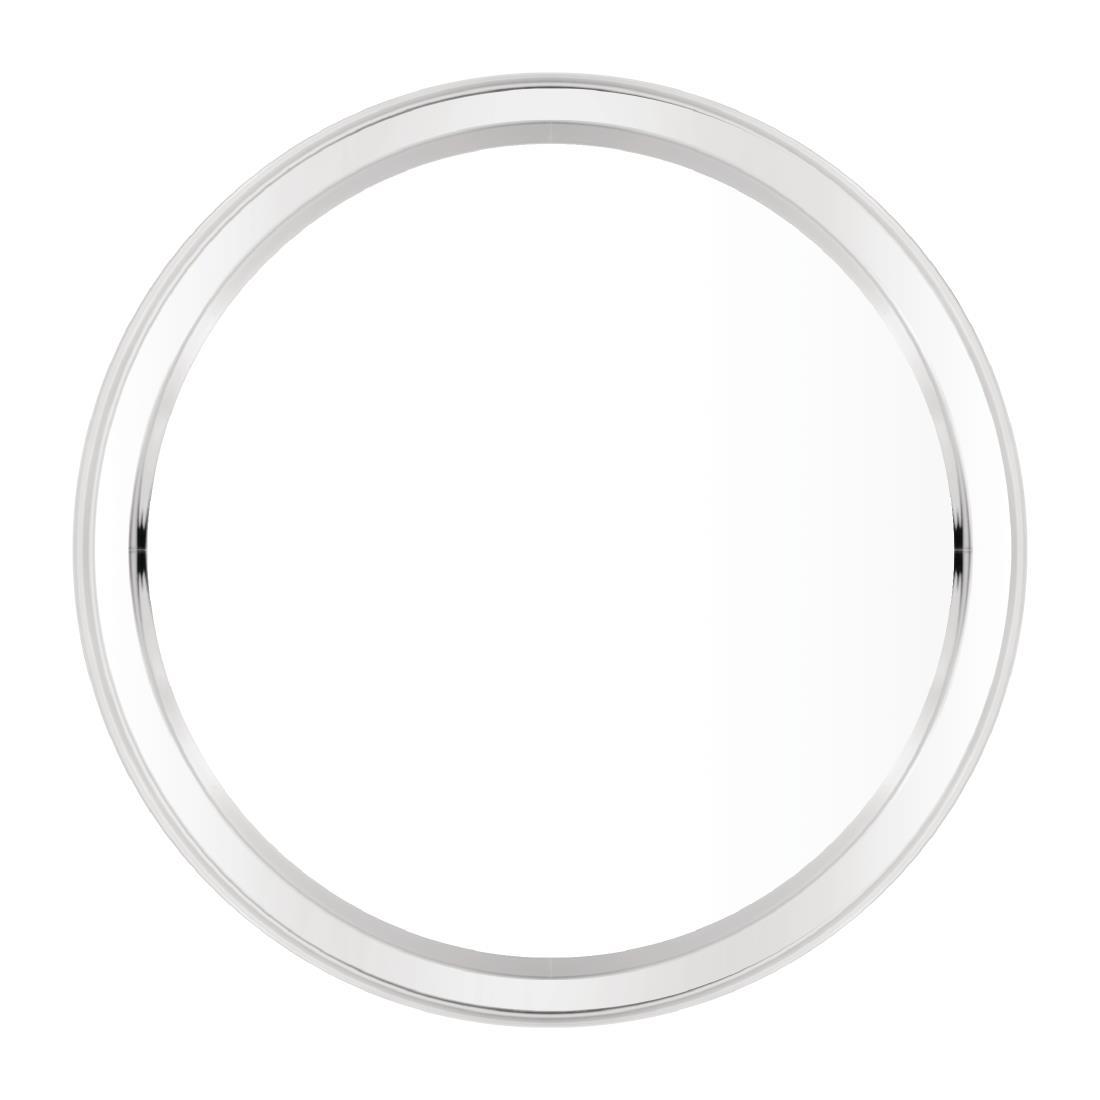 Olympia Stainless Steel Round Service Tray 305mm - J828  - 1